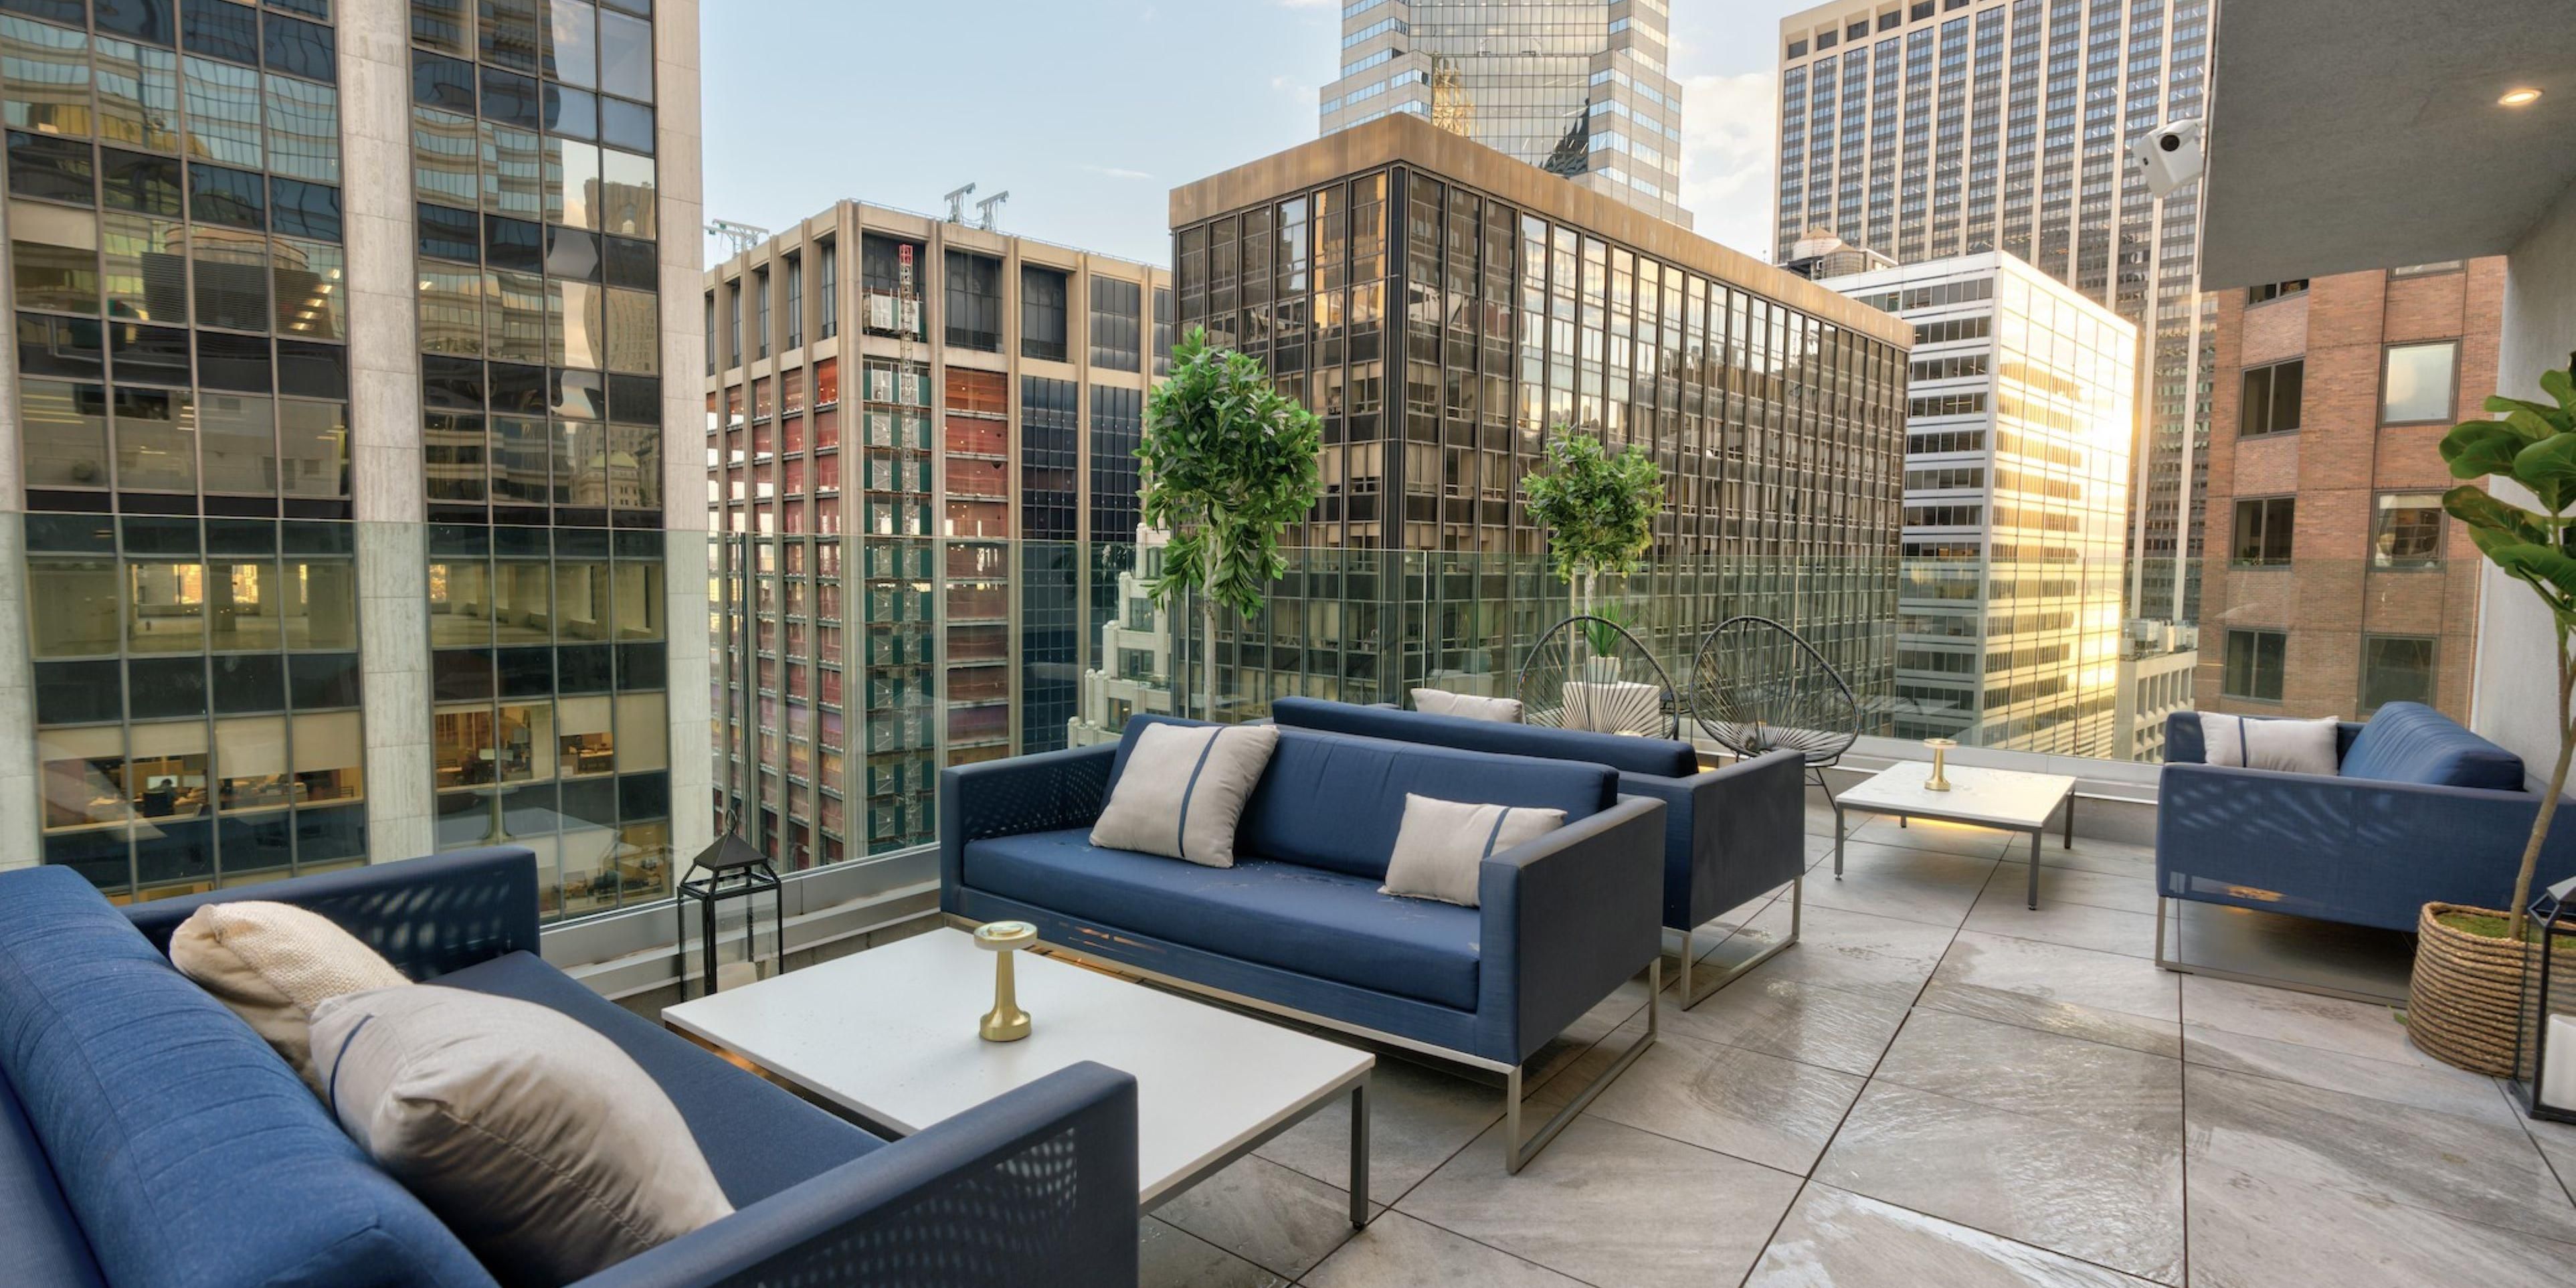 Lounge in style on our 26th floor rooftop bar